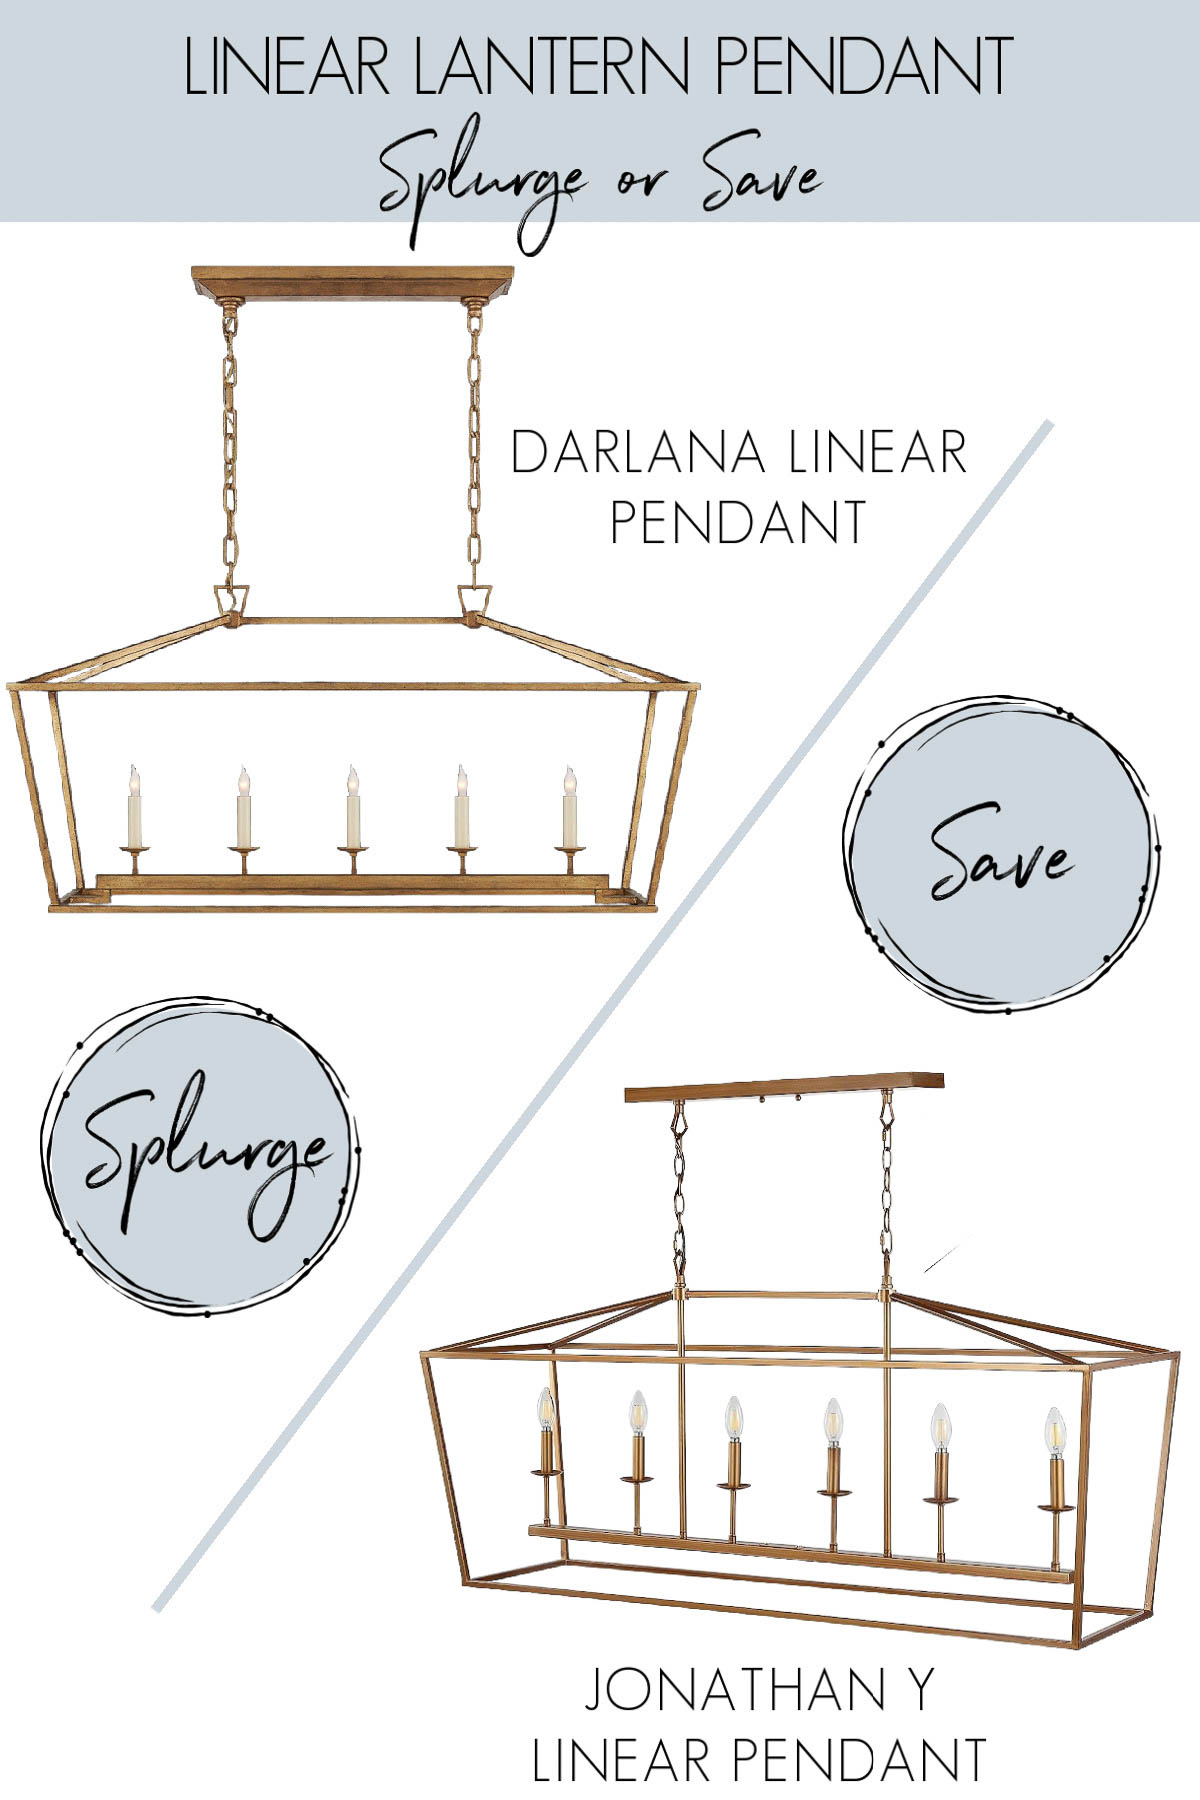 A designer version and look for less version of a linear lantern pendant